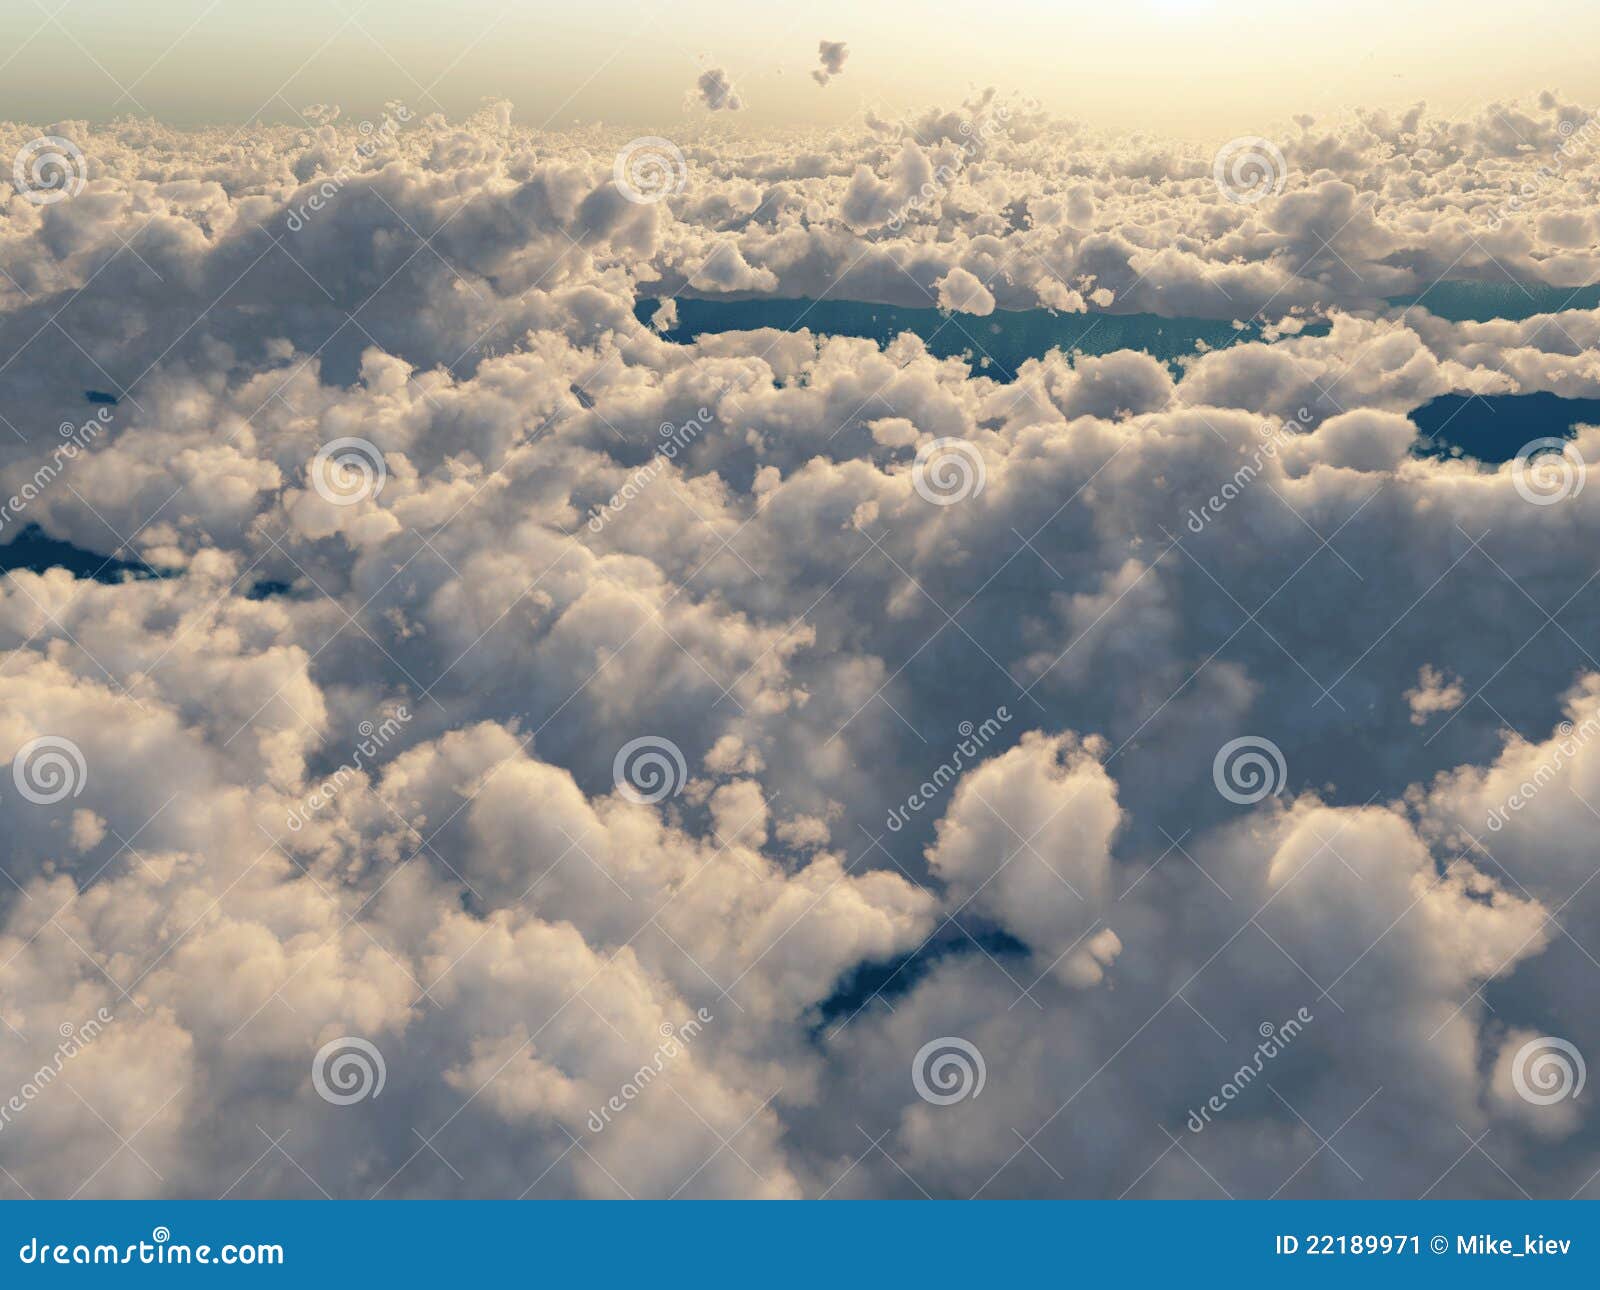 flight above the clouds